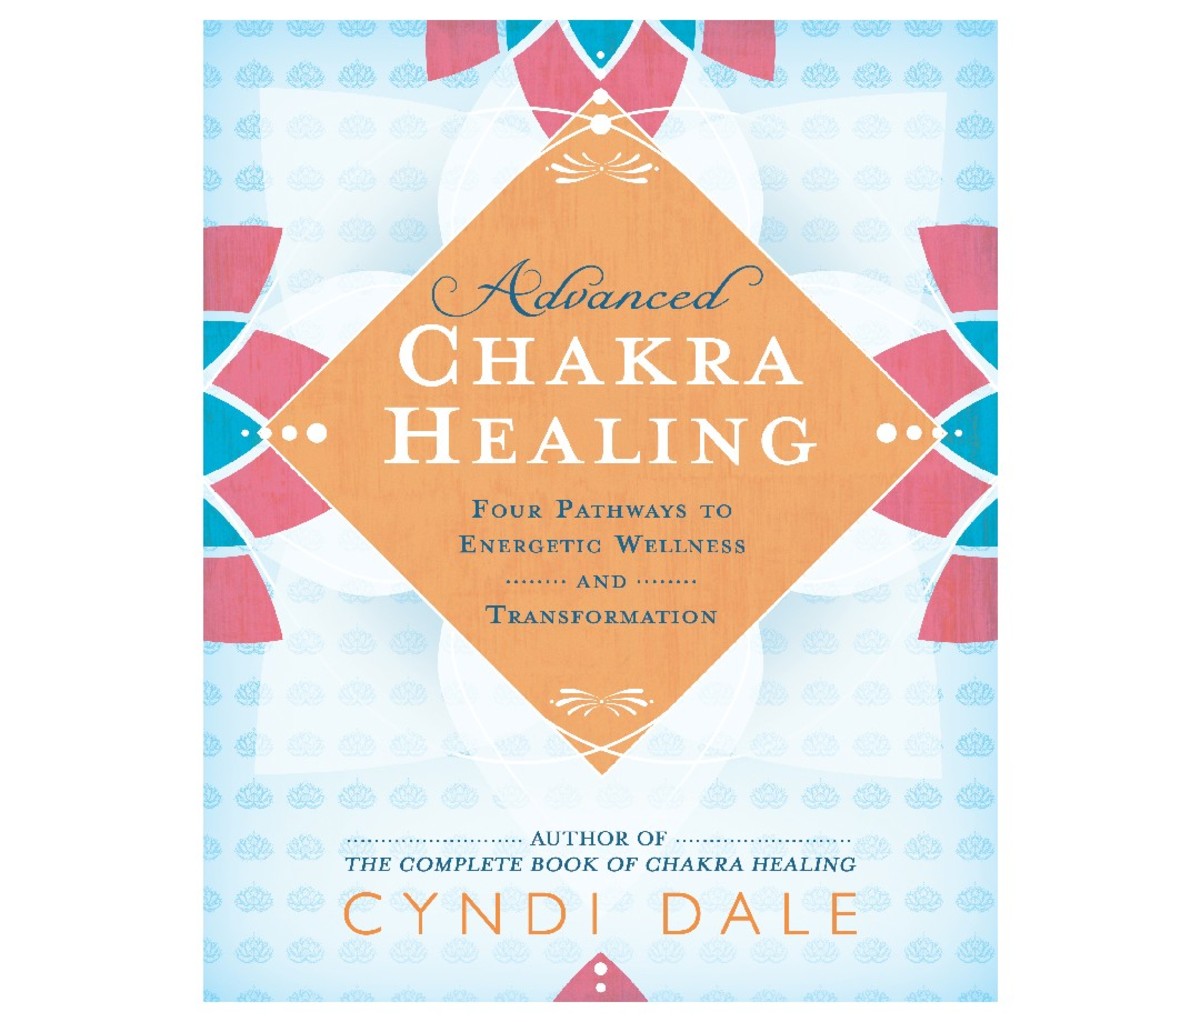 Advanced Chakra Healing: Four Paths to Energetic Wellbeing and Transformation by Cyndi Dale